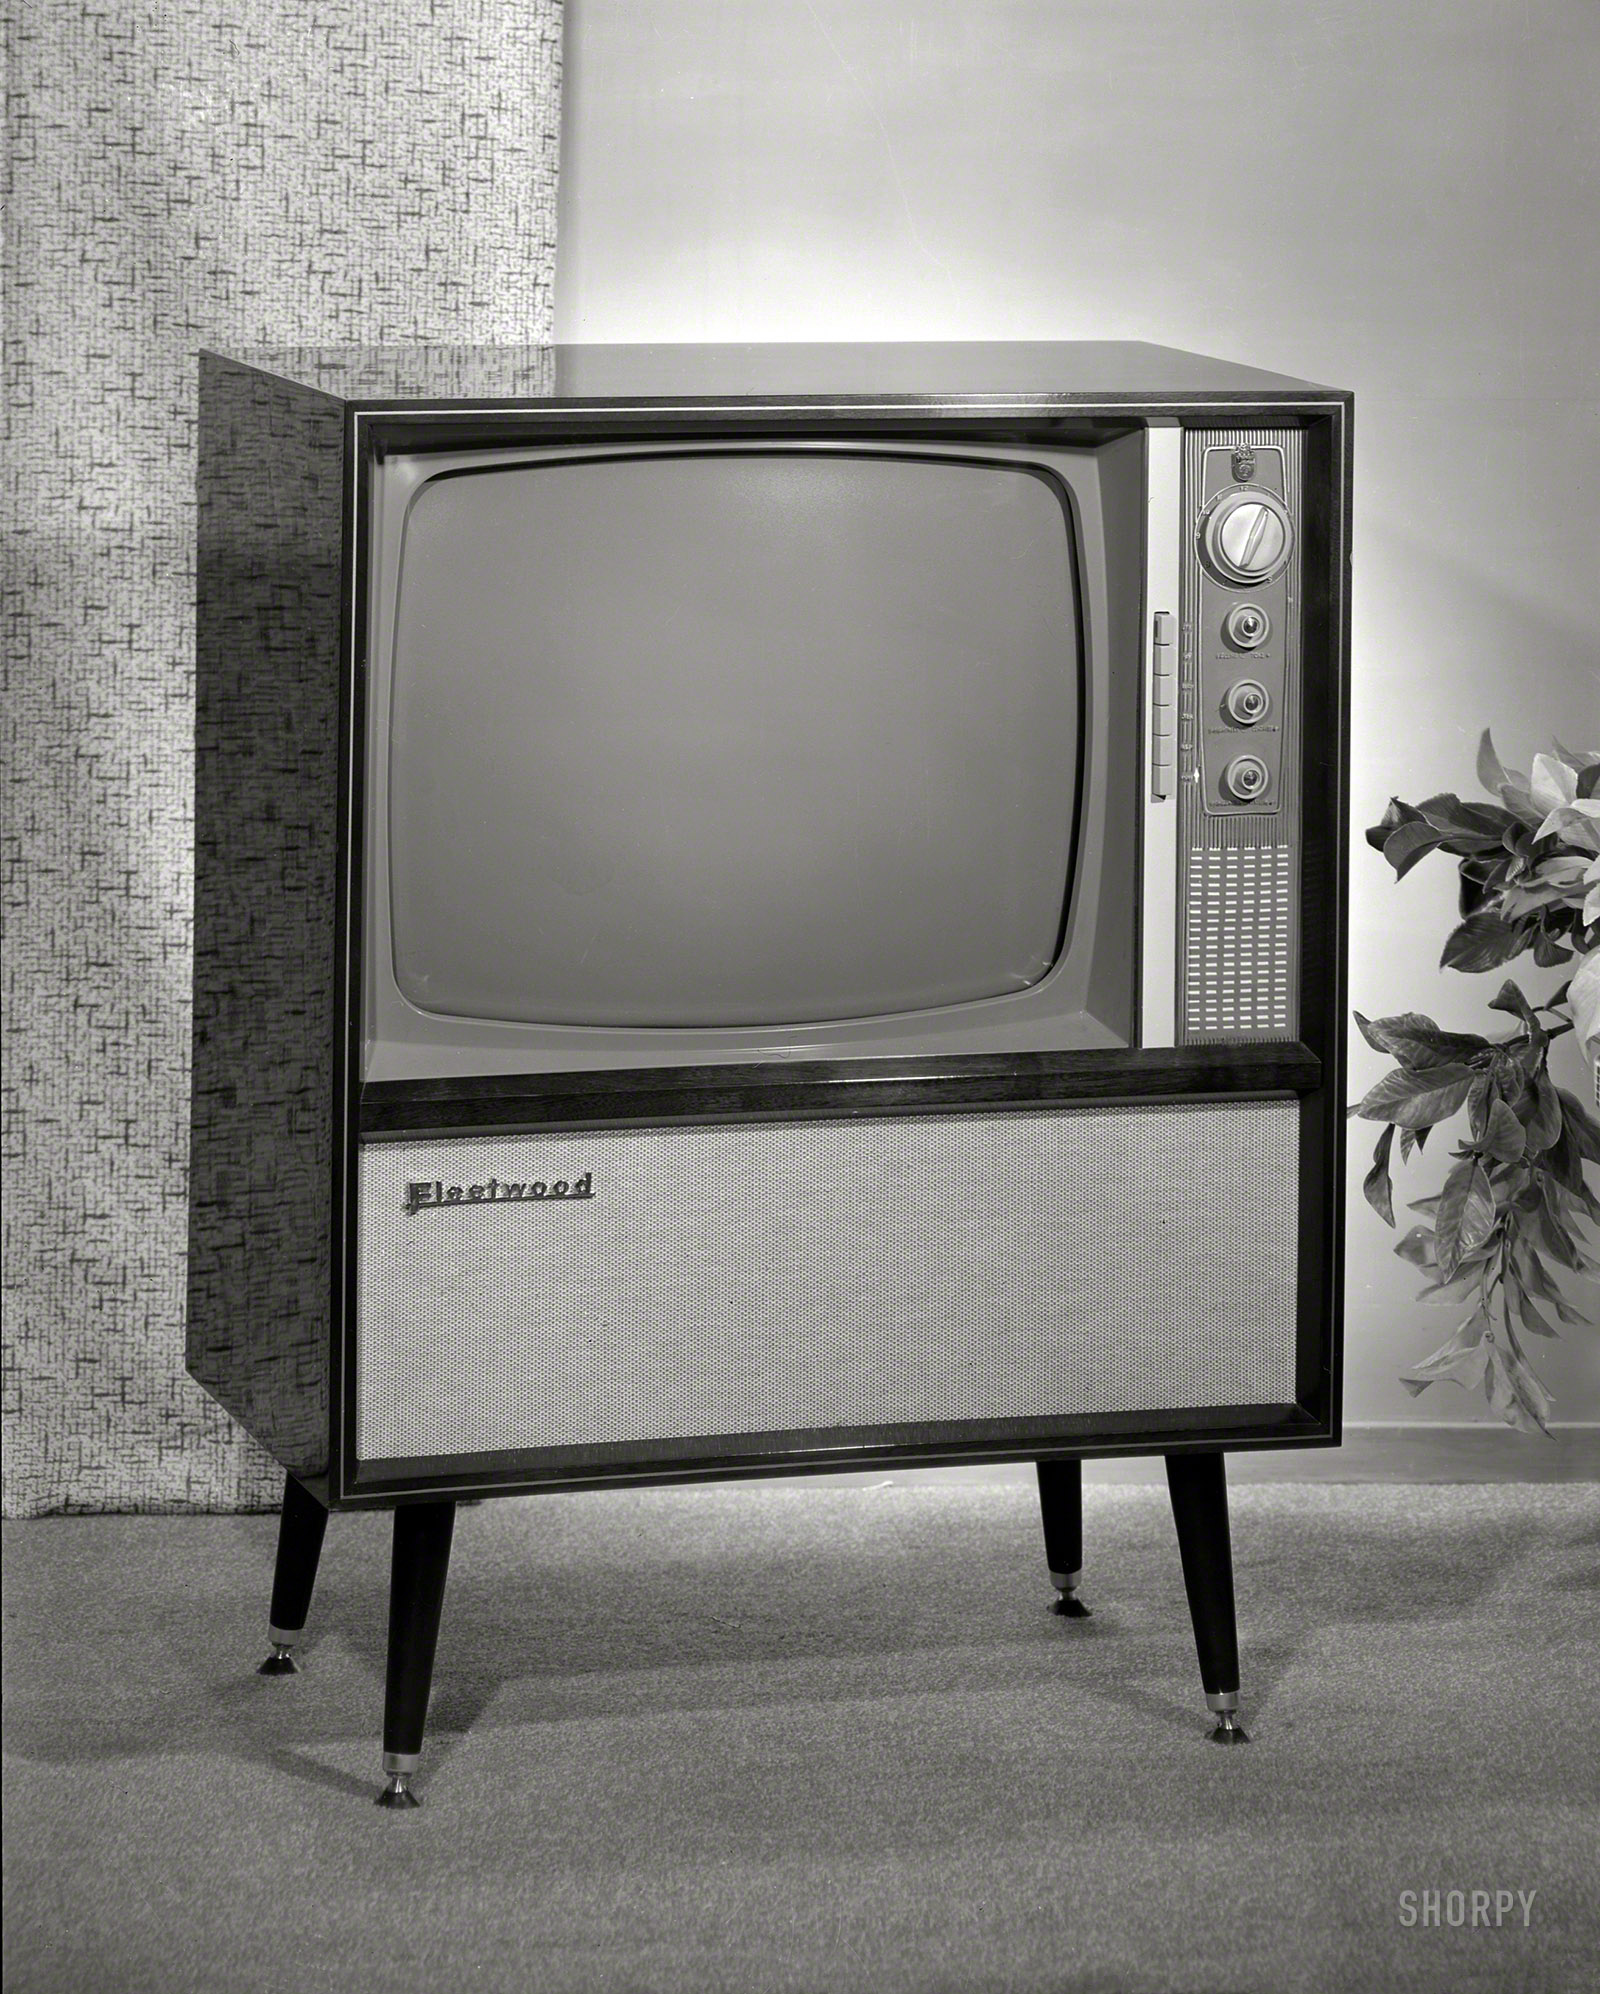 "Fleetwood television circa 1960." Studio of Gordon Burt, Wellington, New Zealand. We don't guess this would stream Amazon or Netflix. View full size.